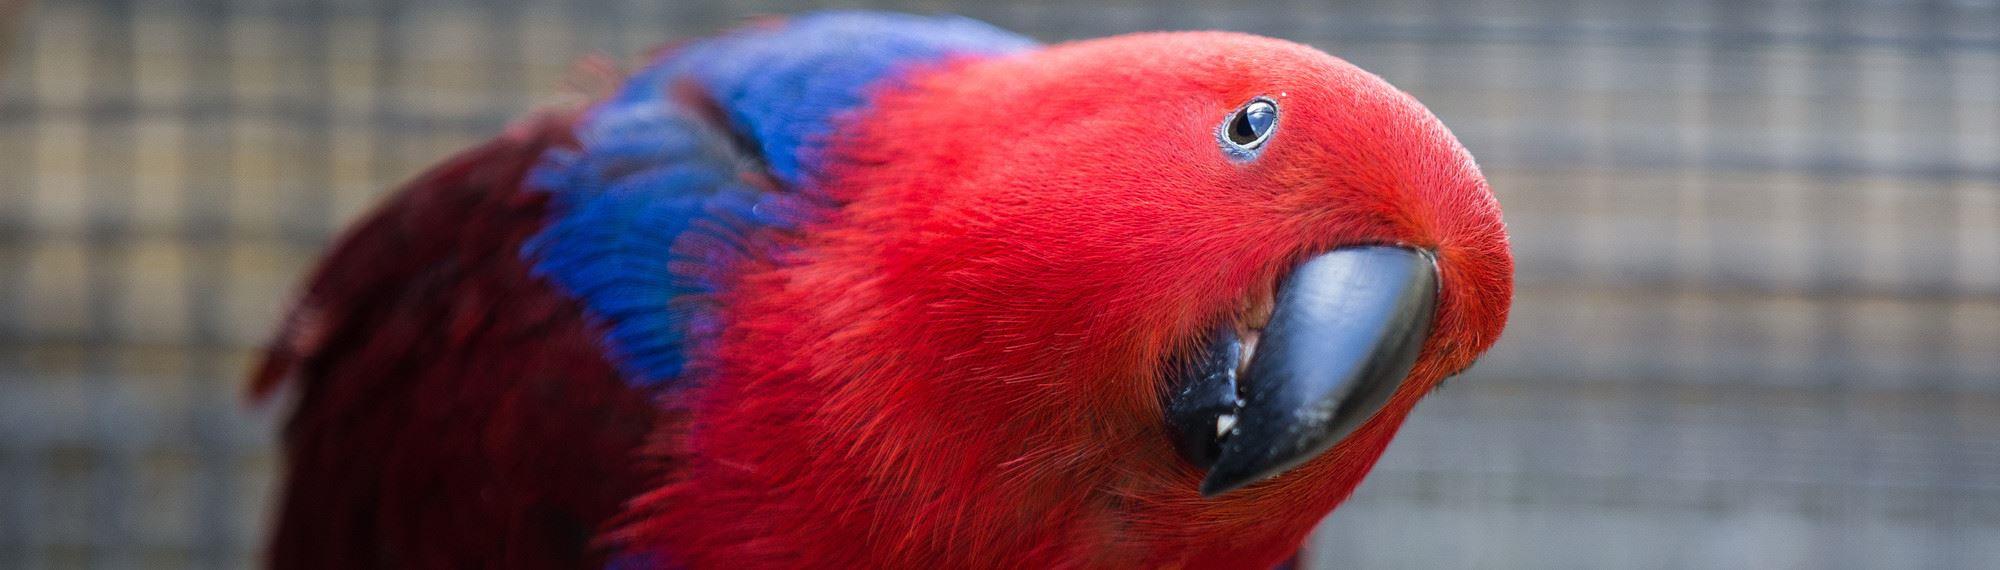 Female Eclectus parrot with head on side. She has a bright red coloured head, blue shoulders and deep red wings.